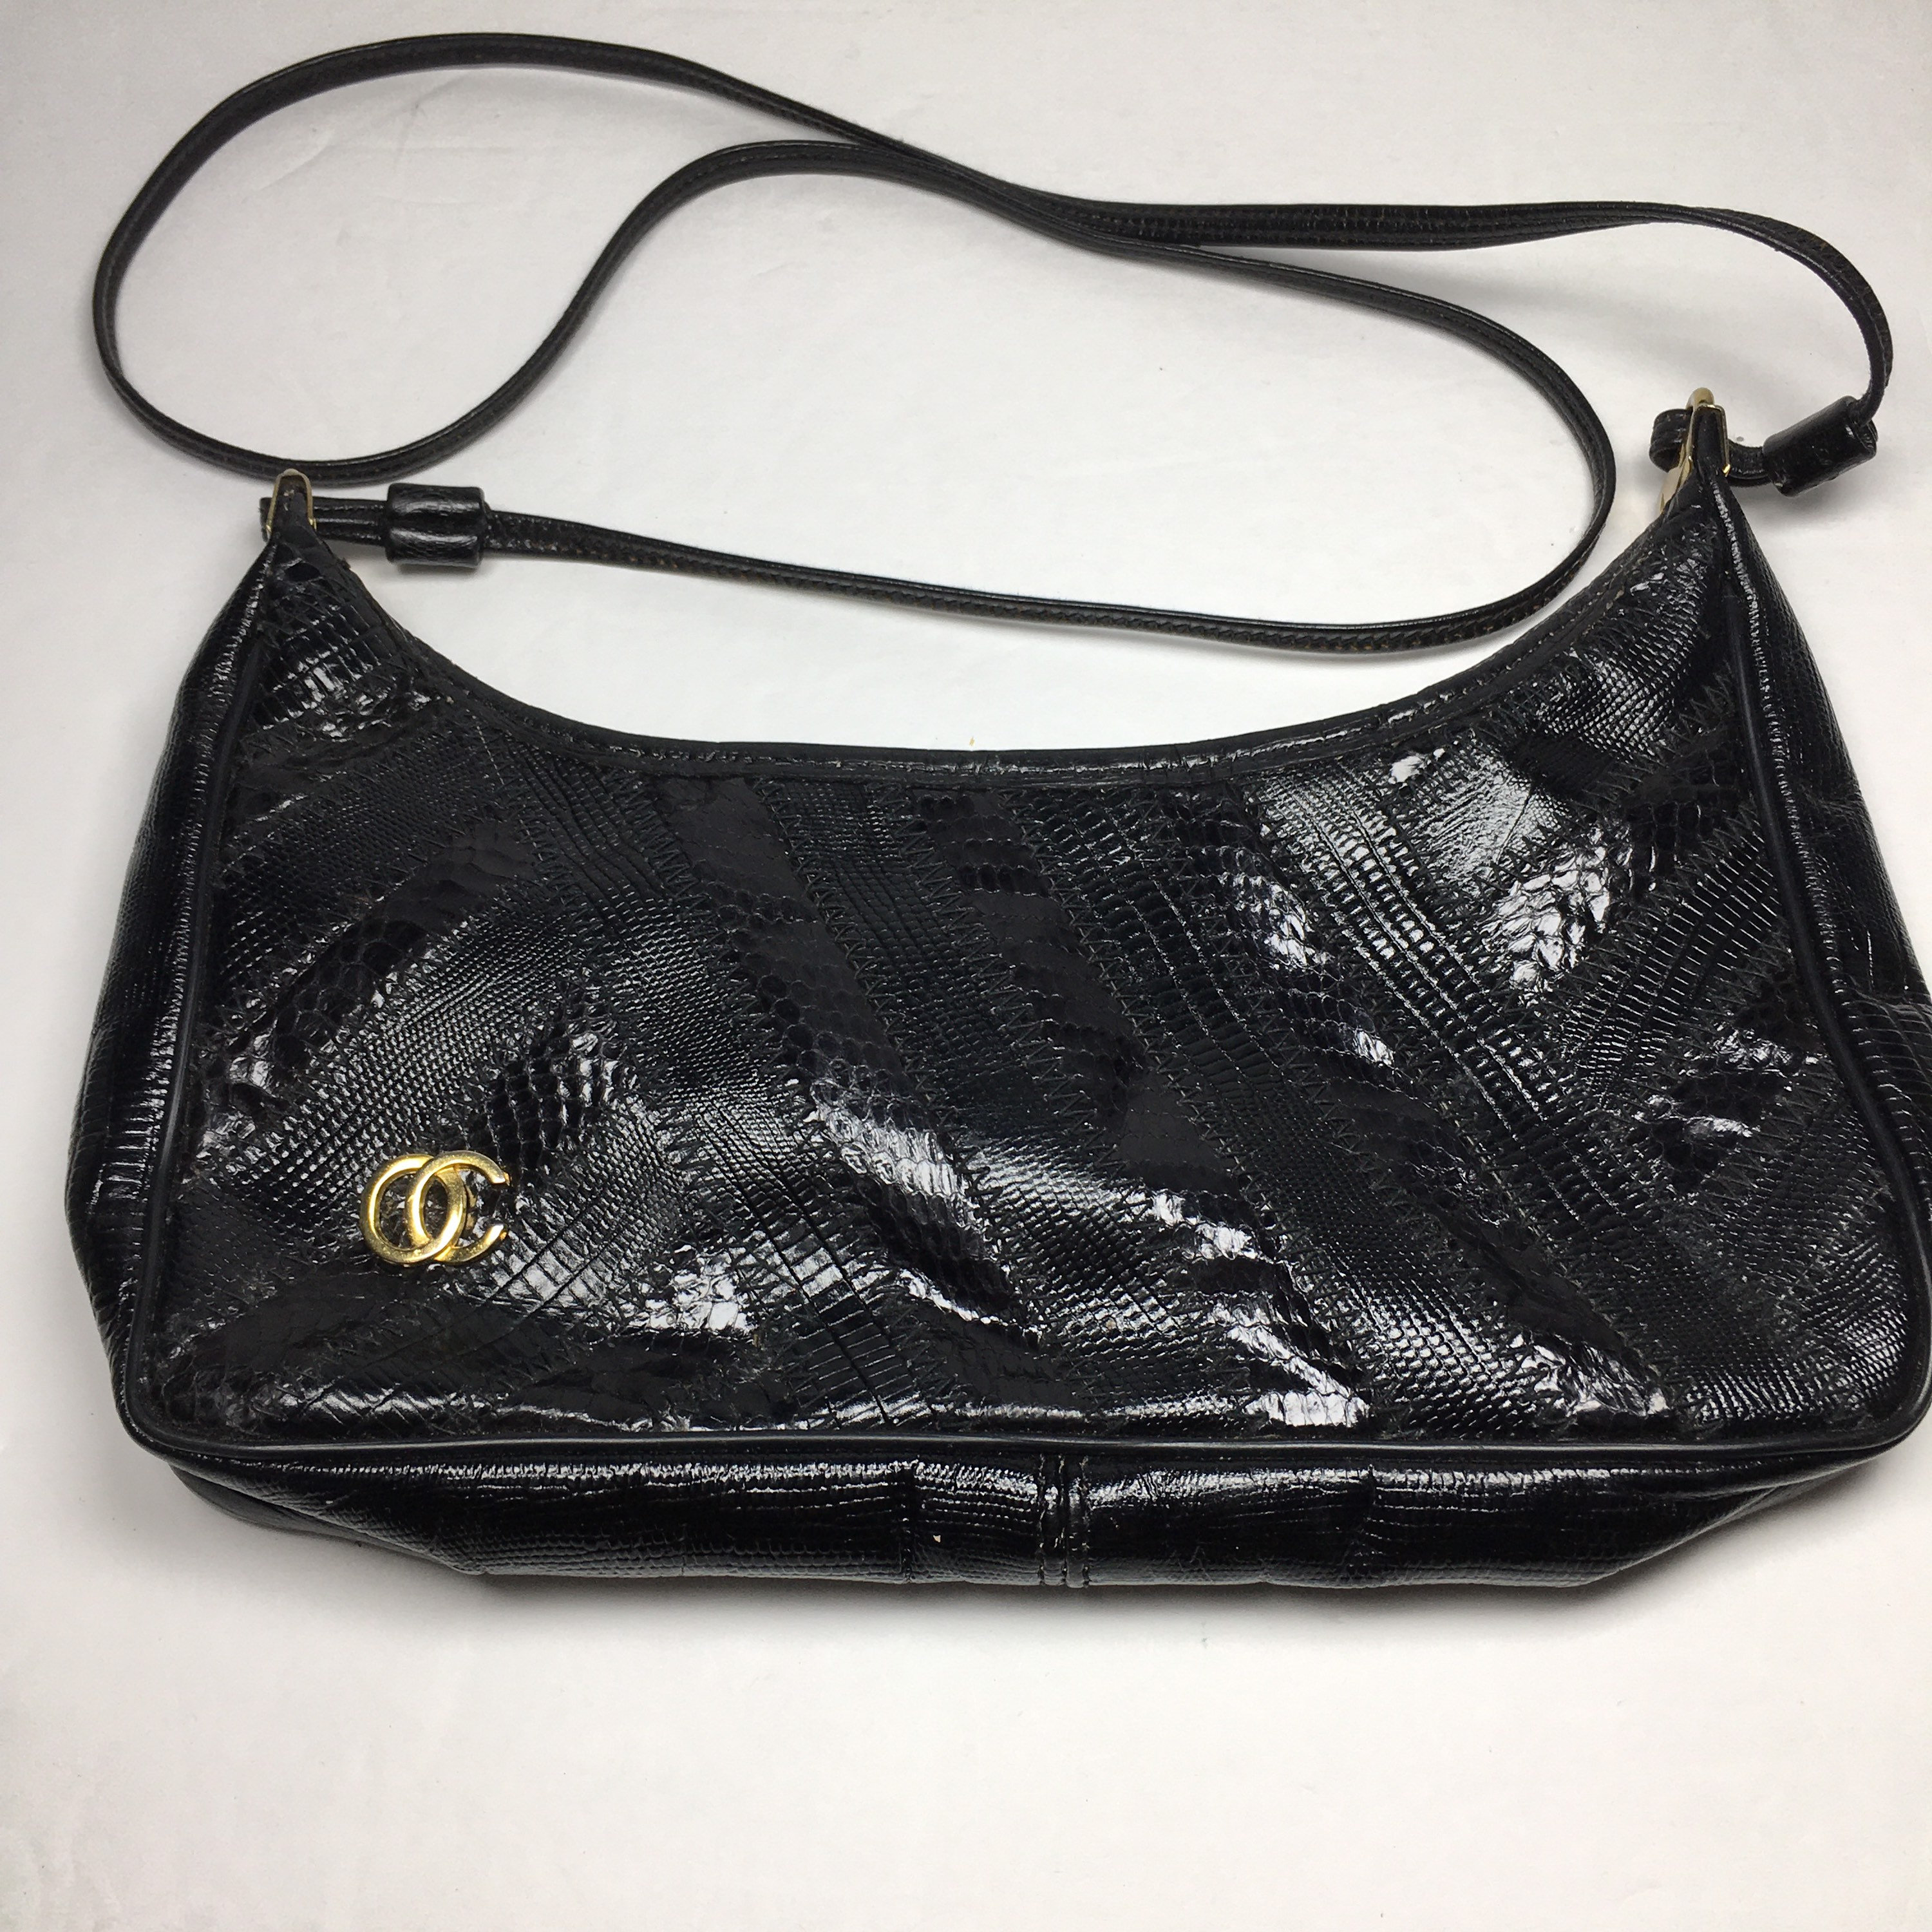 CHANEL, Bags, Chanel Vintage Patent Leather Tote